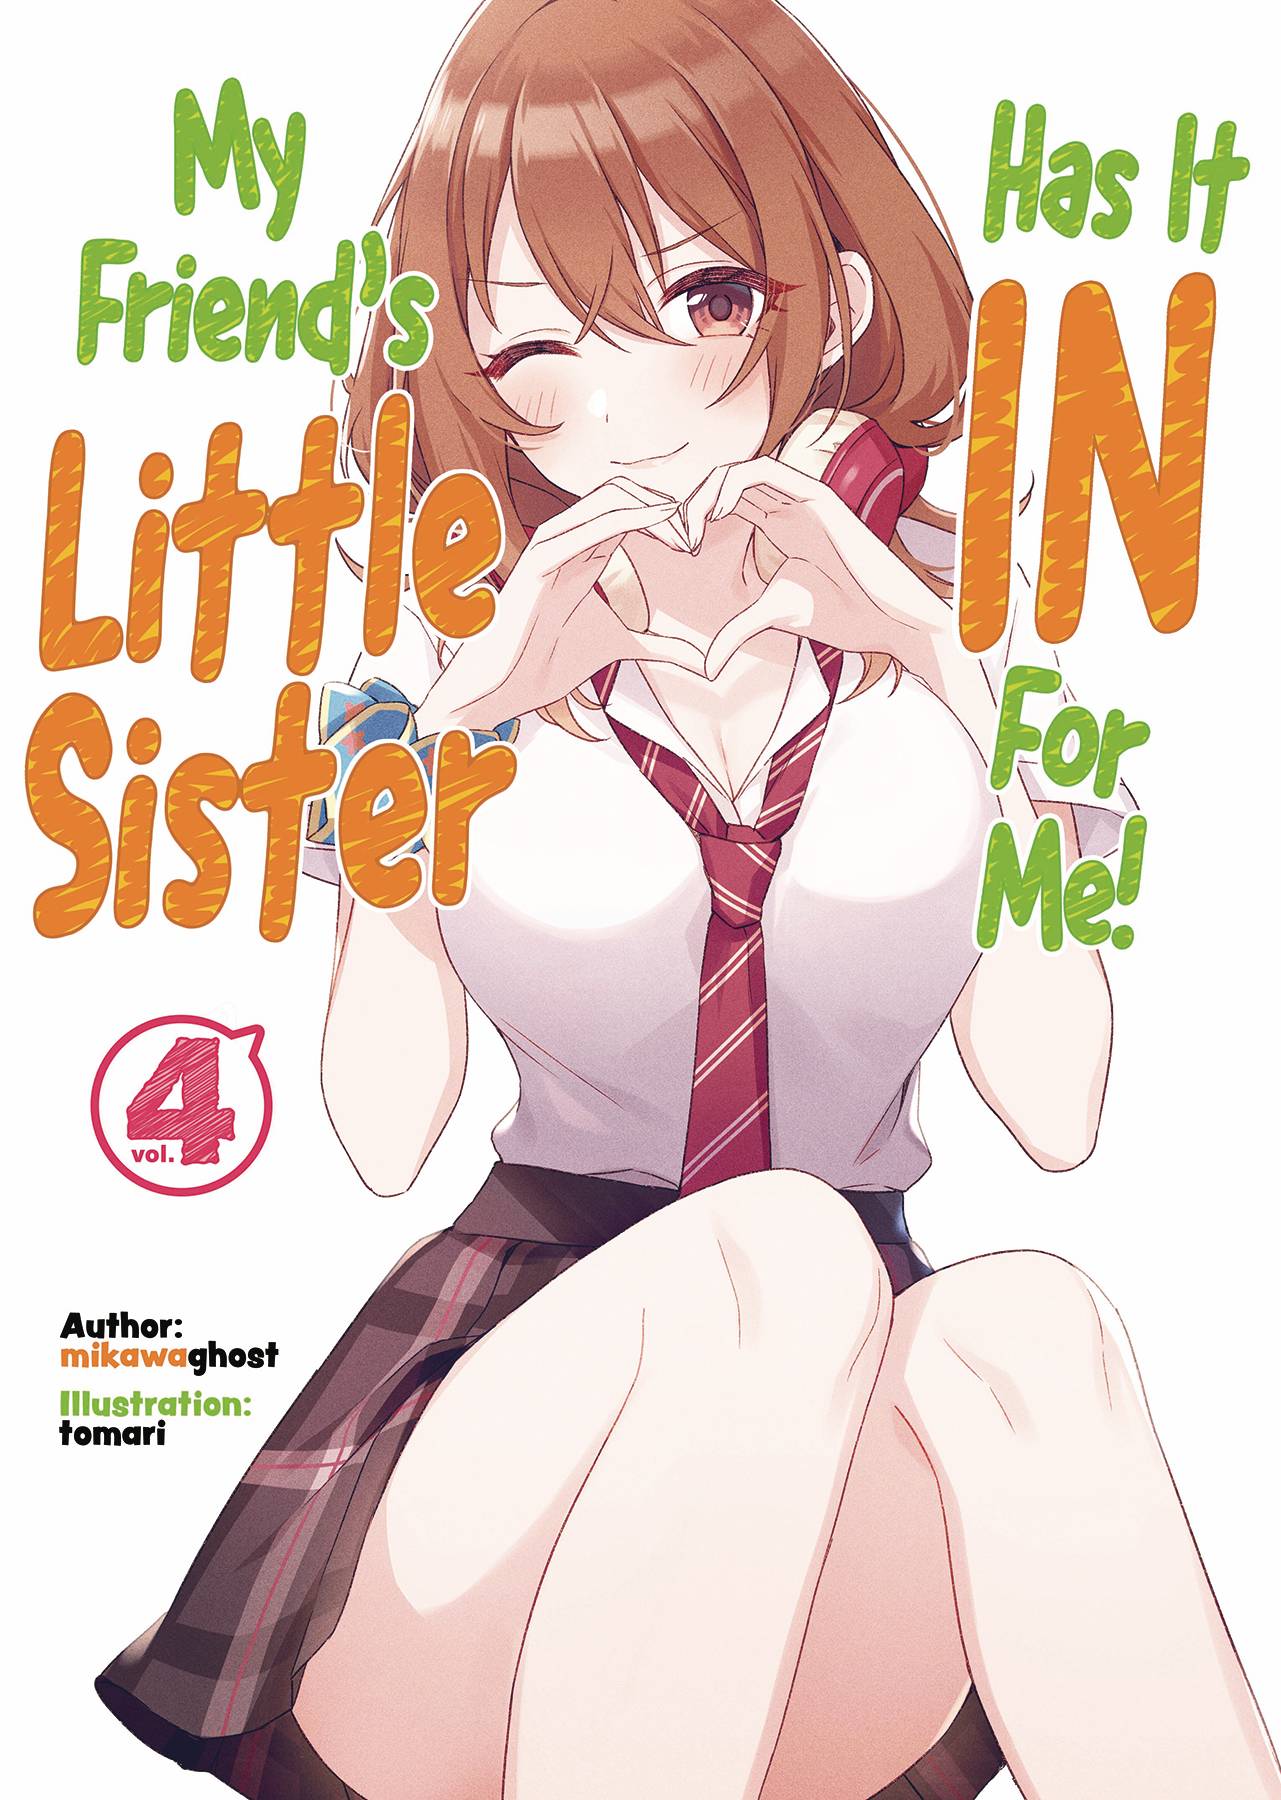 MY FRIENDS LITTLE SISTER IN FOR ME L NOVEL VOL 04